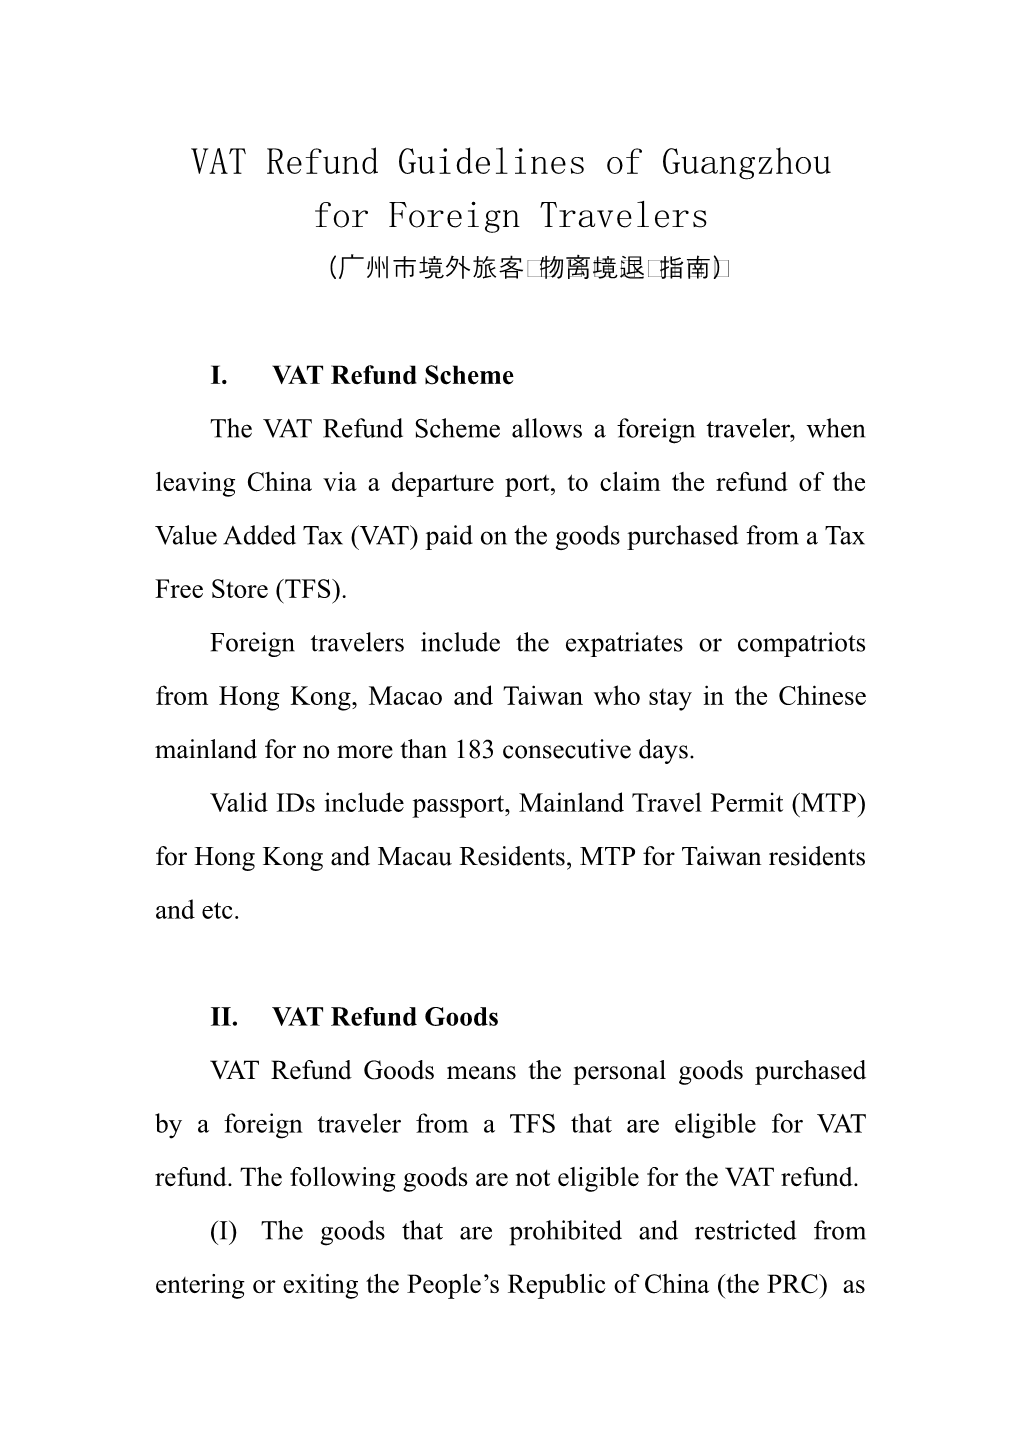 VAT Refund Guidelines of Guangzhou for Foreign Travelers